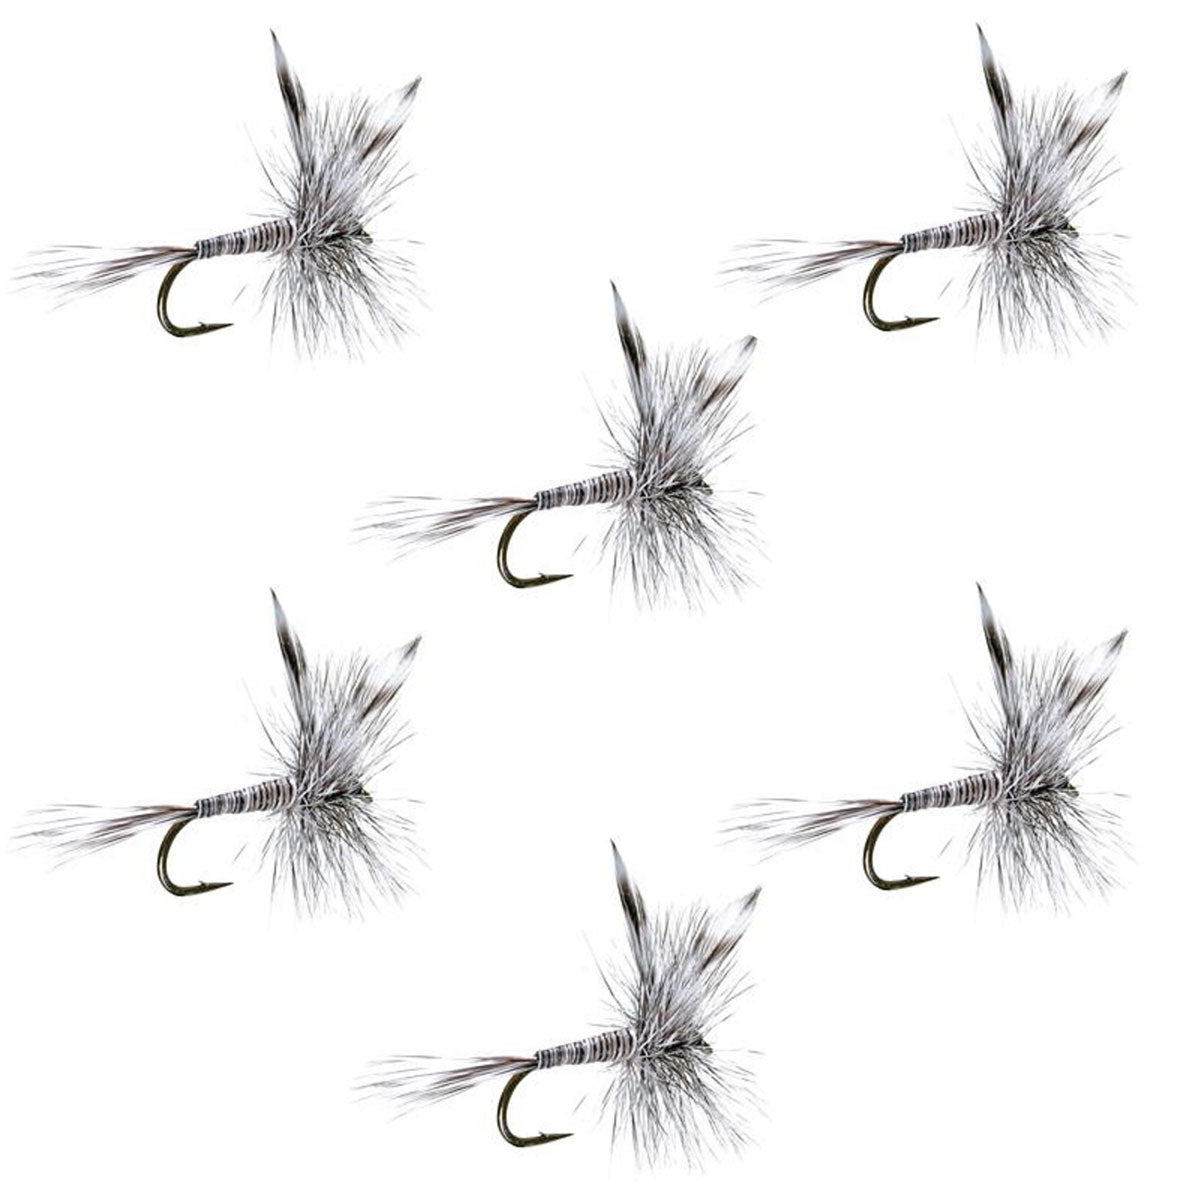 Mosquito Classic Trout Dry Fly Fishing Flies - Set of 6 Flies Size 16